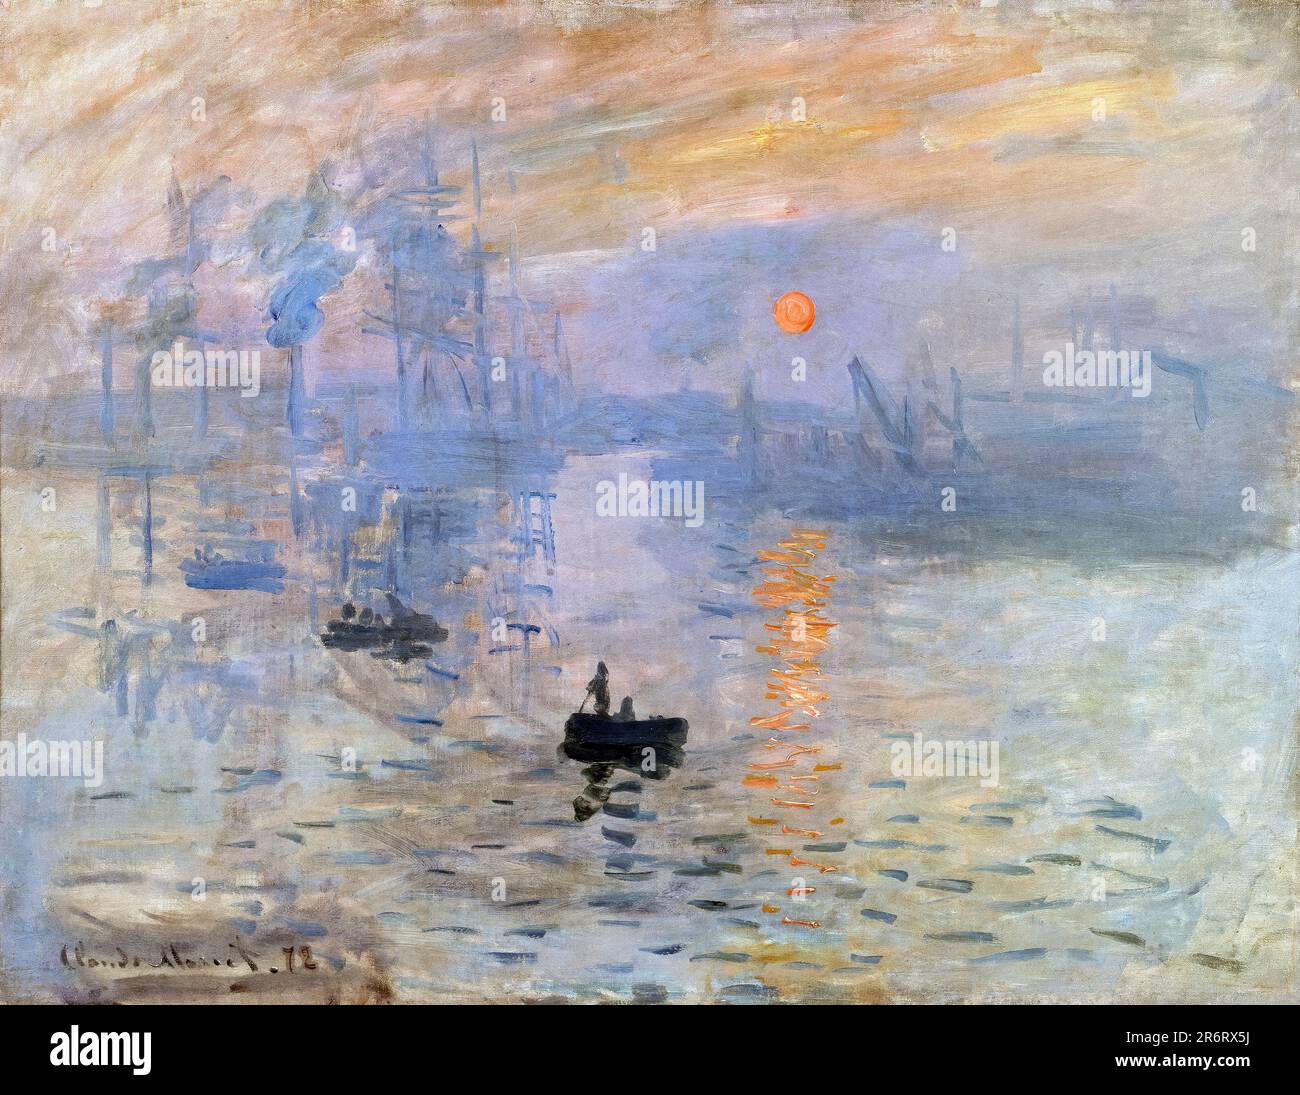 Impression Sunrise, Monet. Landscape painting in oil on canvas by Claude Monet, 1872 Stock Photo